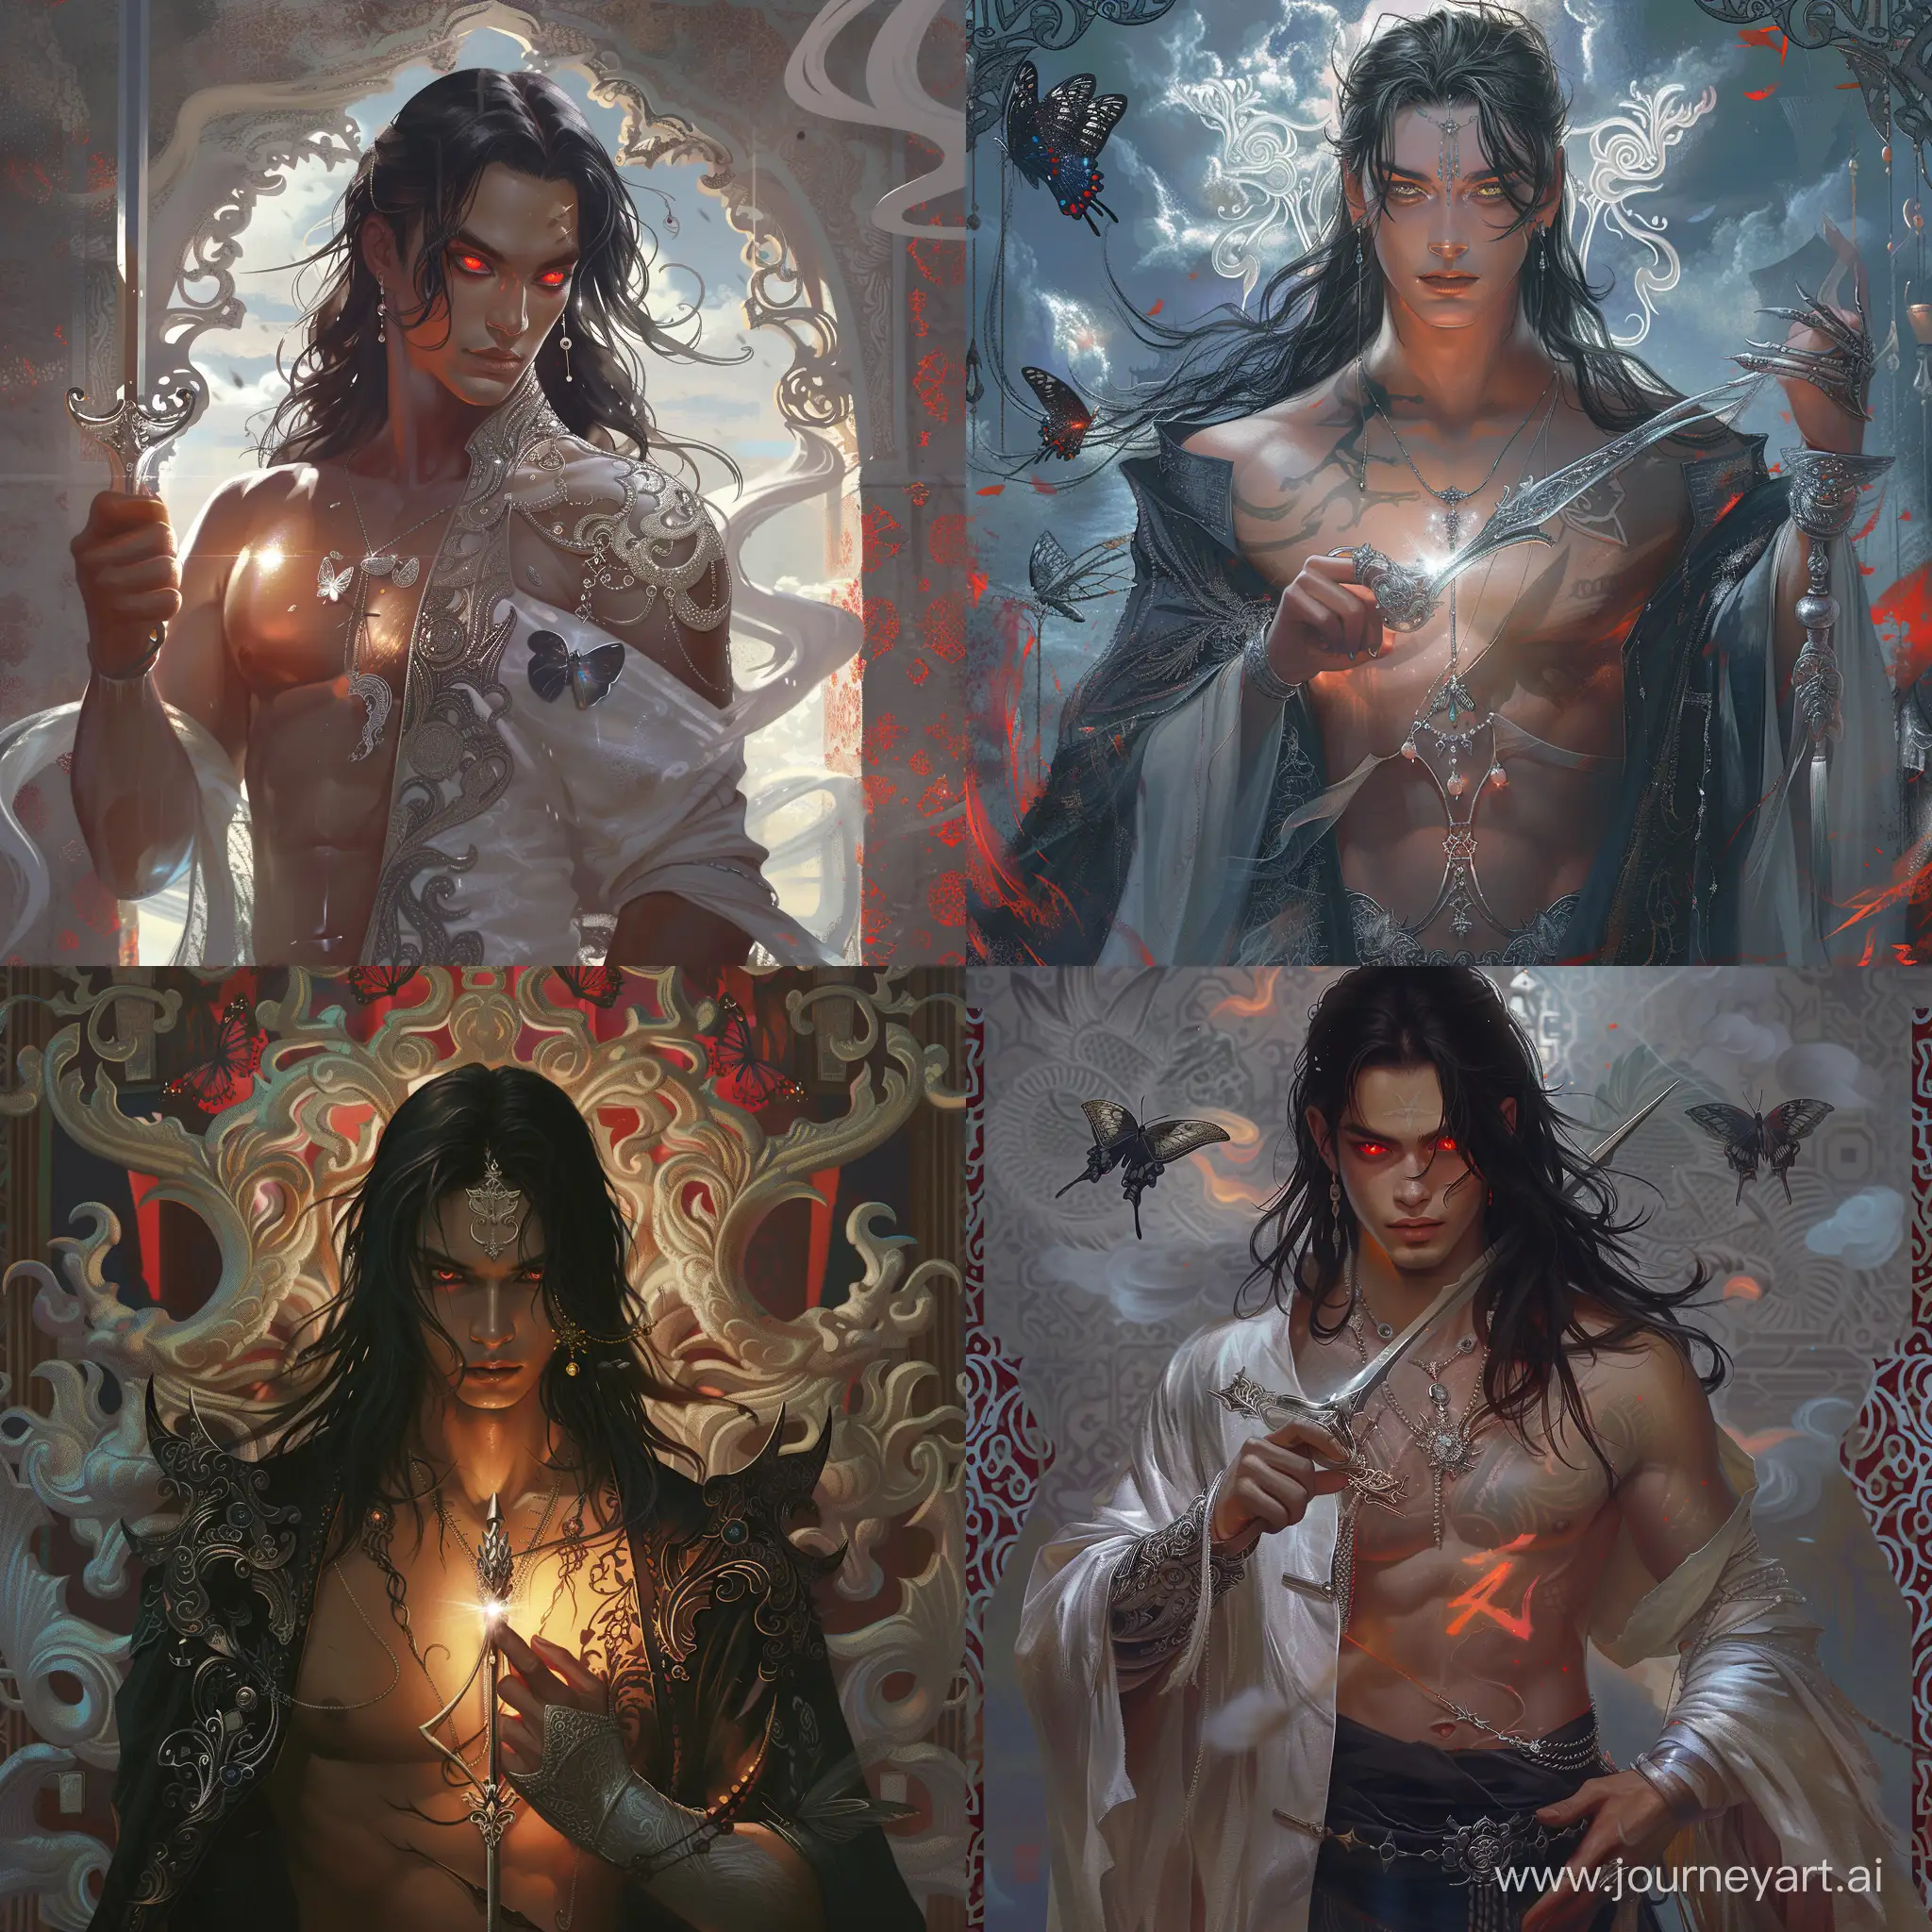 butterfly jewelry, one man holding a silver dagger, danmei artstyle, semi realistic art, beautiful scenary cloud architecture, asian fantasy background, open sleeves torso fantasy, magical glow, delicate vambraces, silver jewel, long luxurious black hair, perspective, source of light, detailed, arabian pattern, white asian dragon background, luxurious hair, red hues, red tones colors, glowing eyes